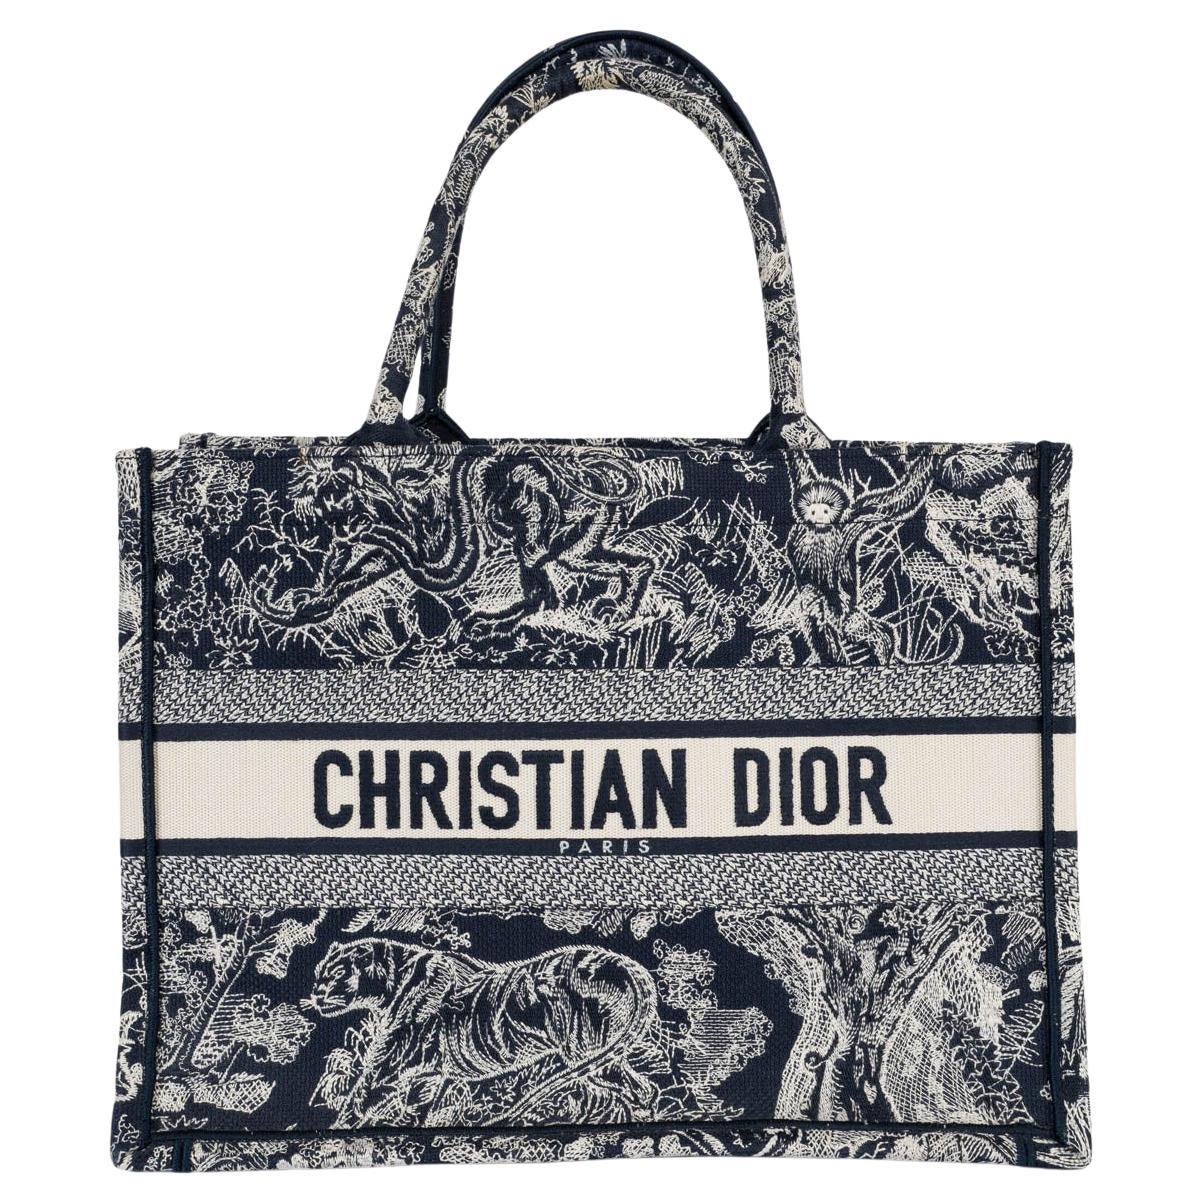 CHRISTIAN DIOR navy blue TOILE DU JOUY REVERSE MEDIUM BOOK TOTE Bag For Sale